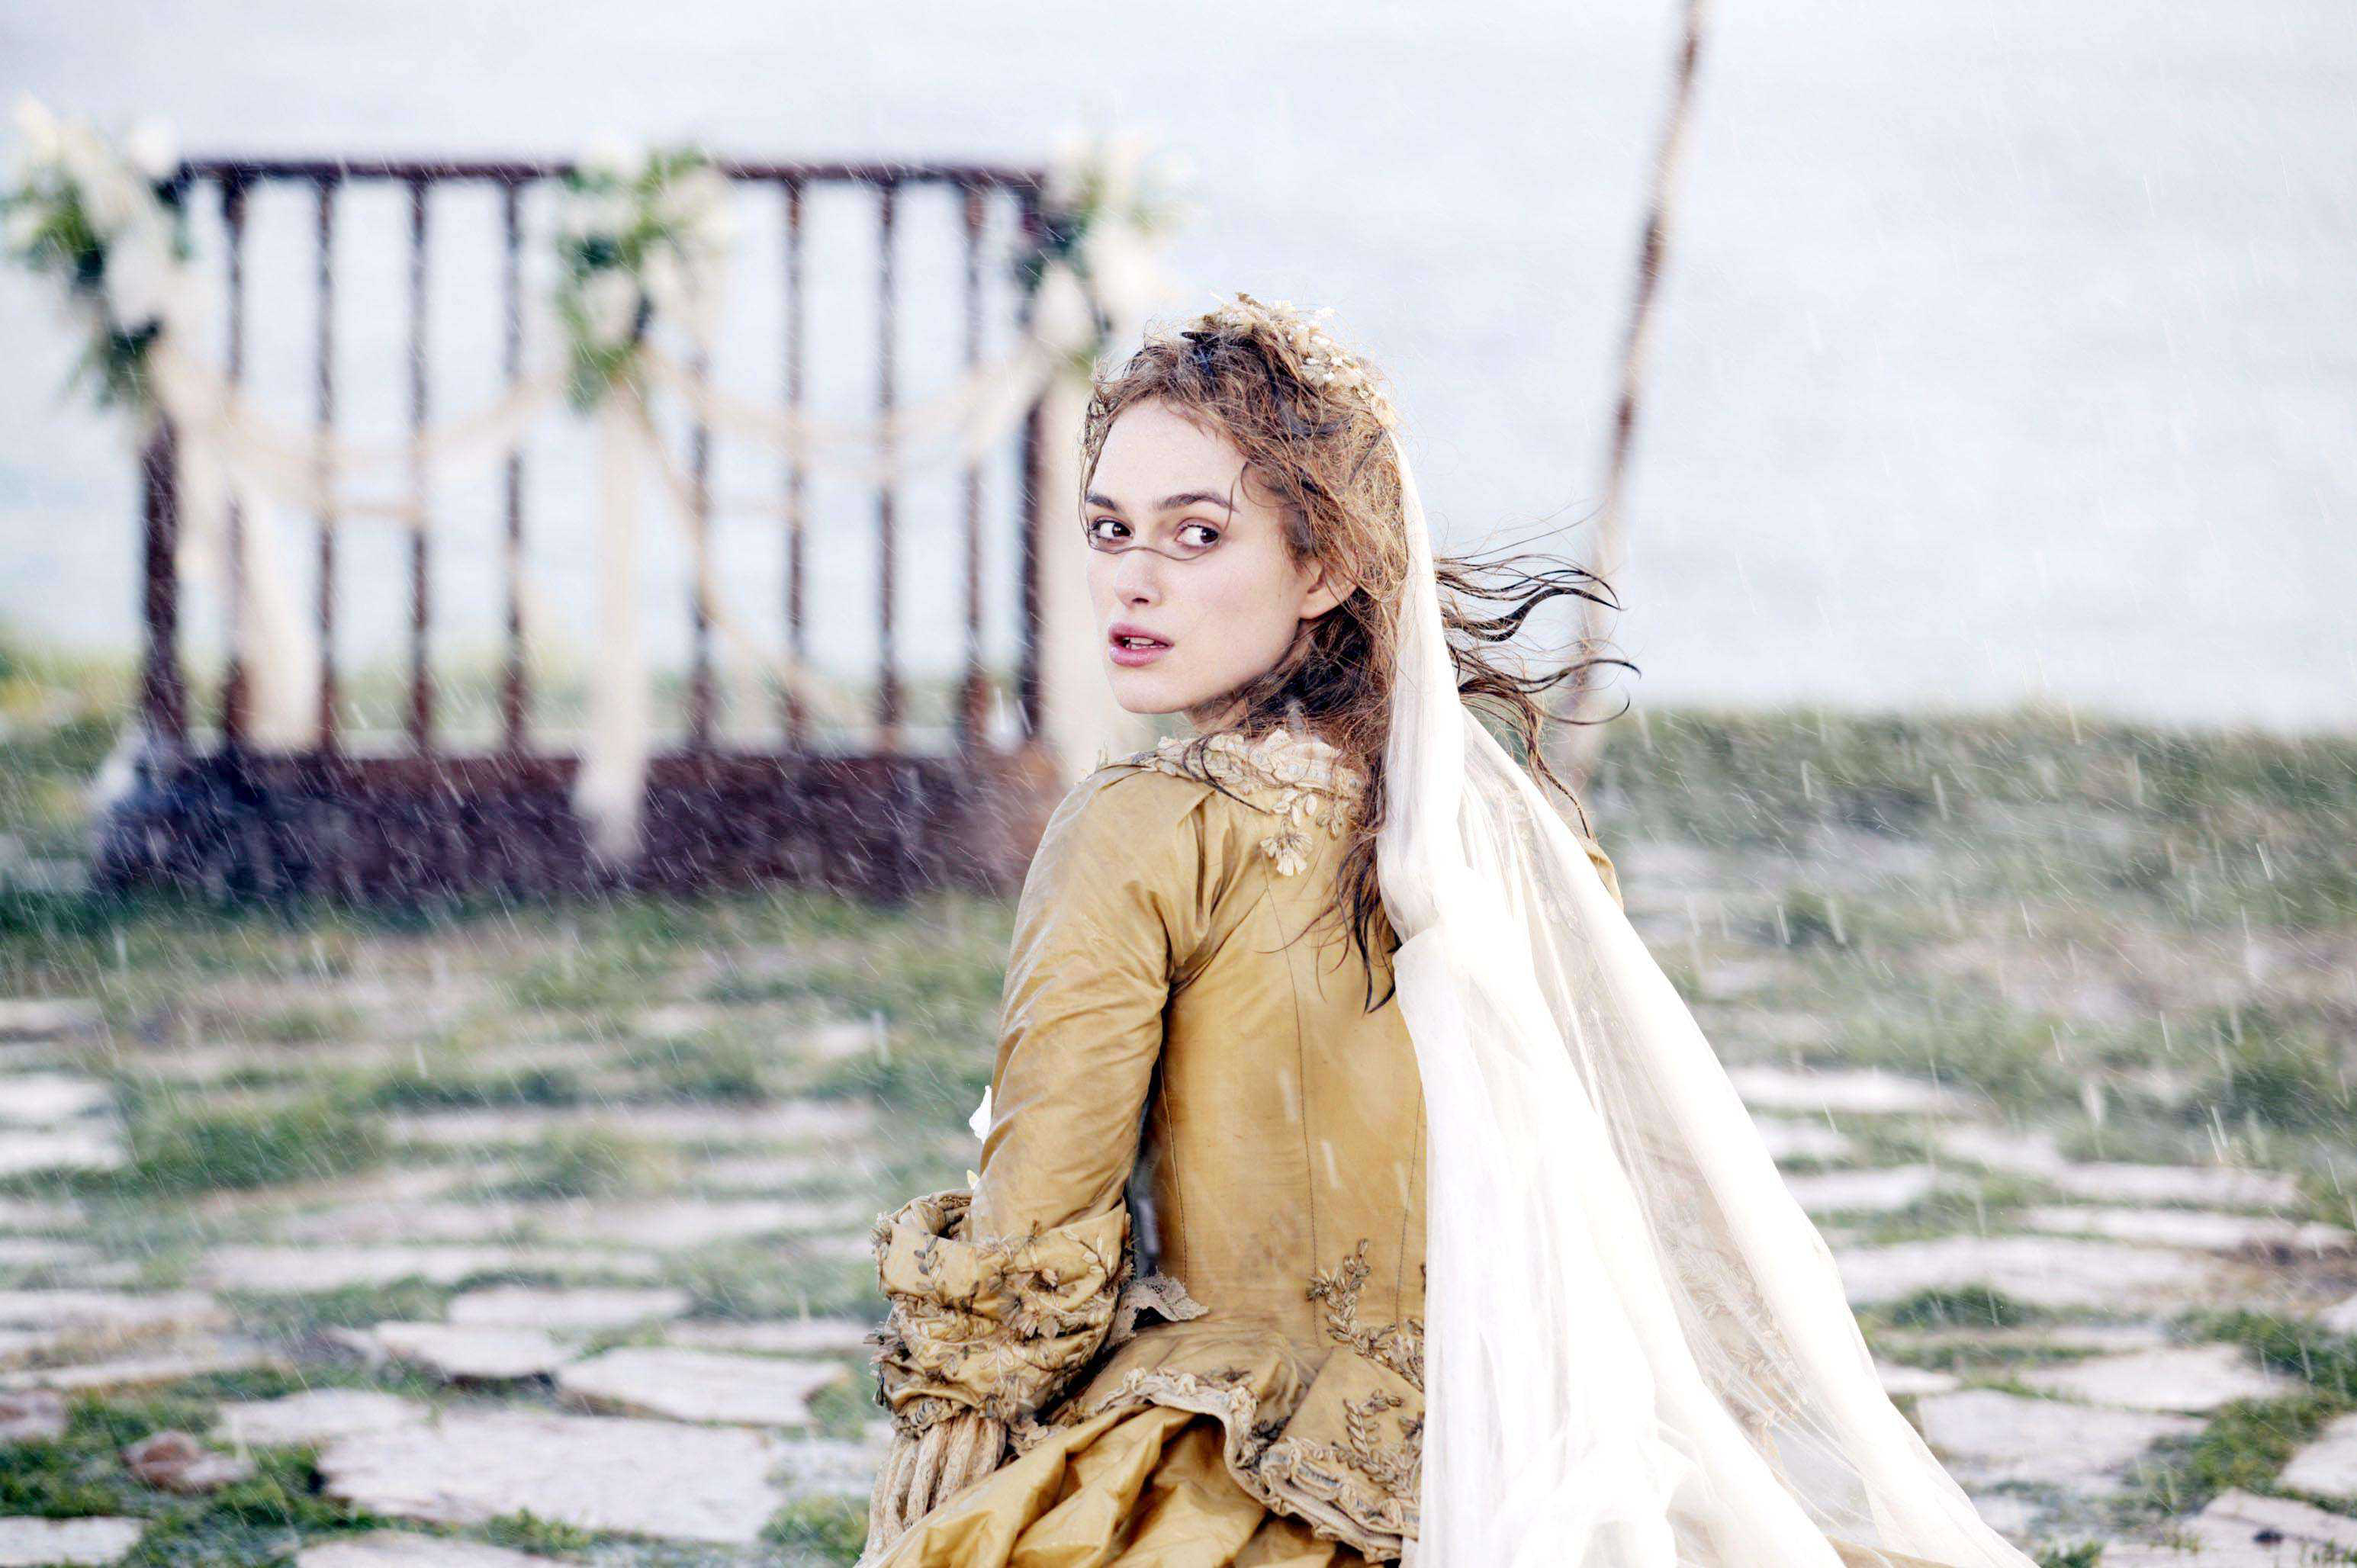 keira knightley, elizabeth swann, movie, pirates of the caribbean: dead man's chest, actress, pirates of the caribbean